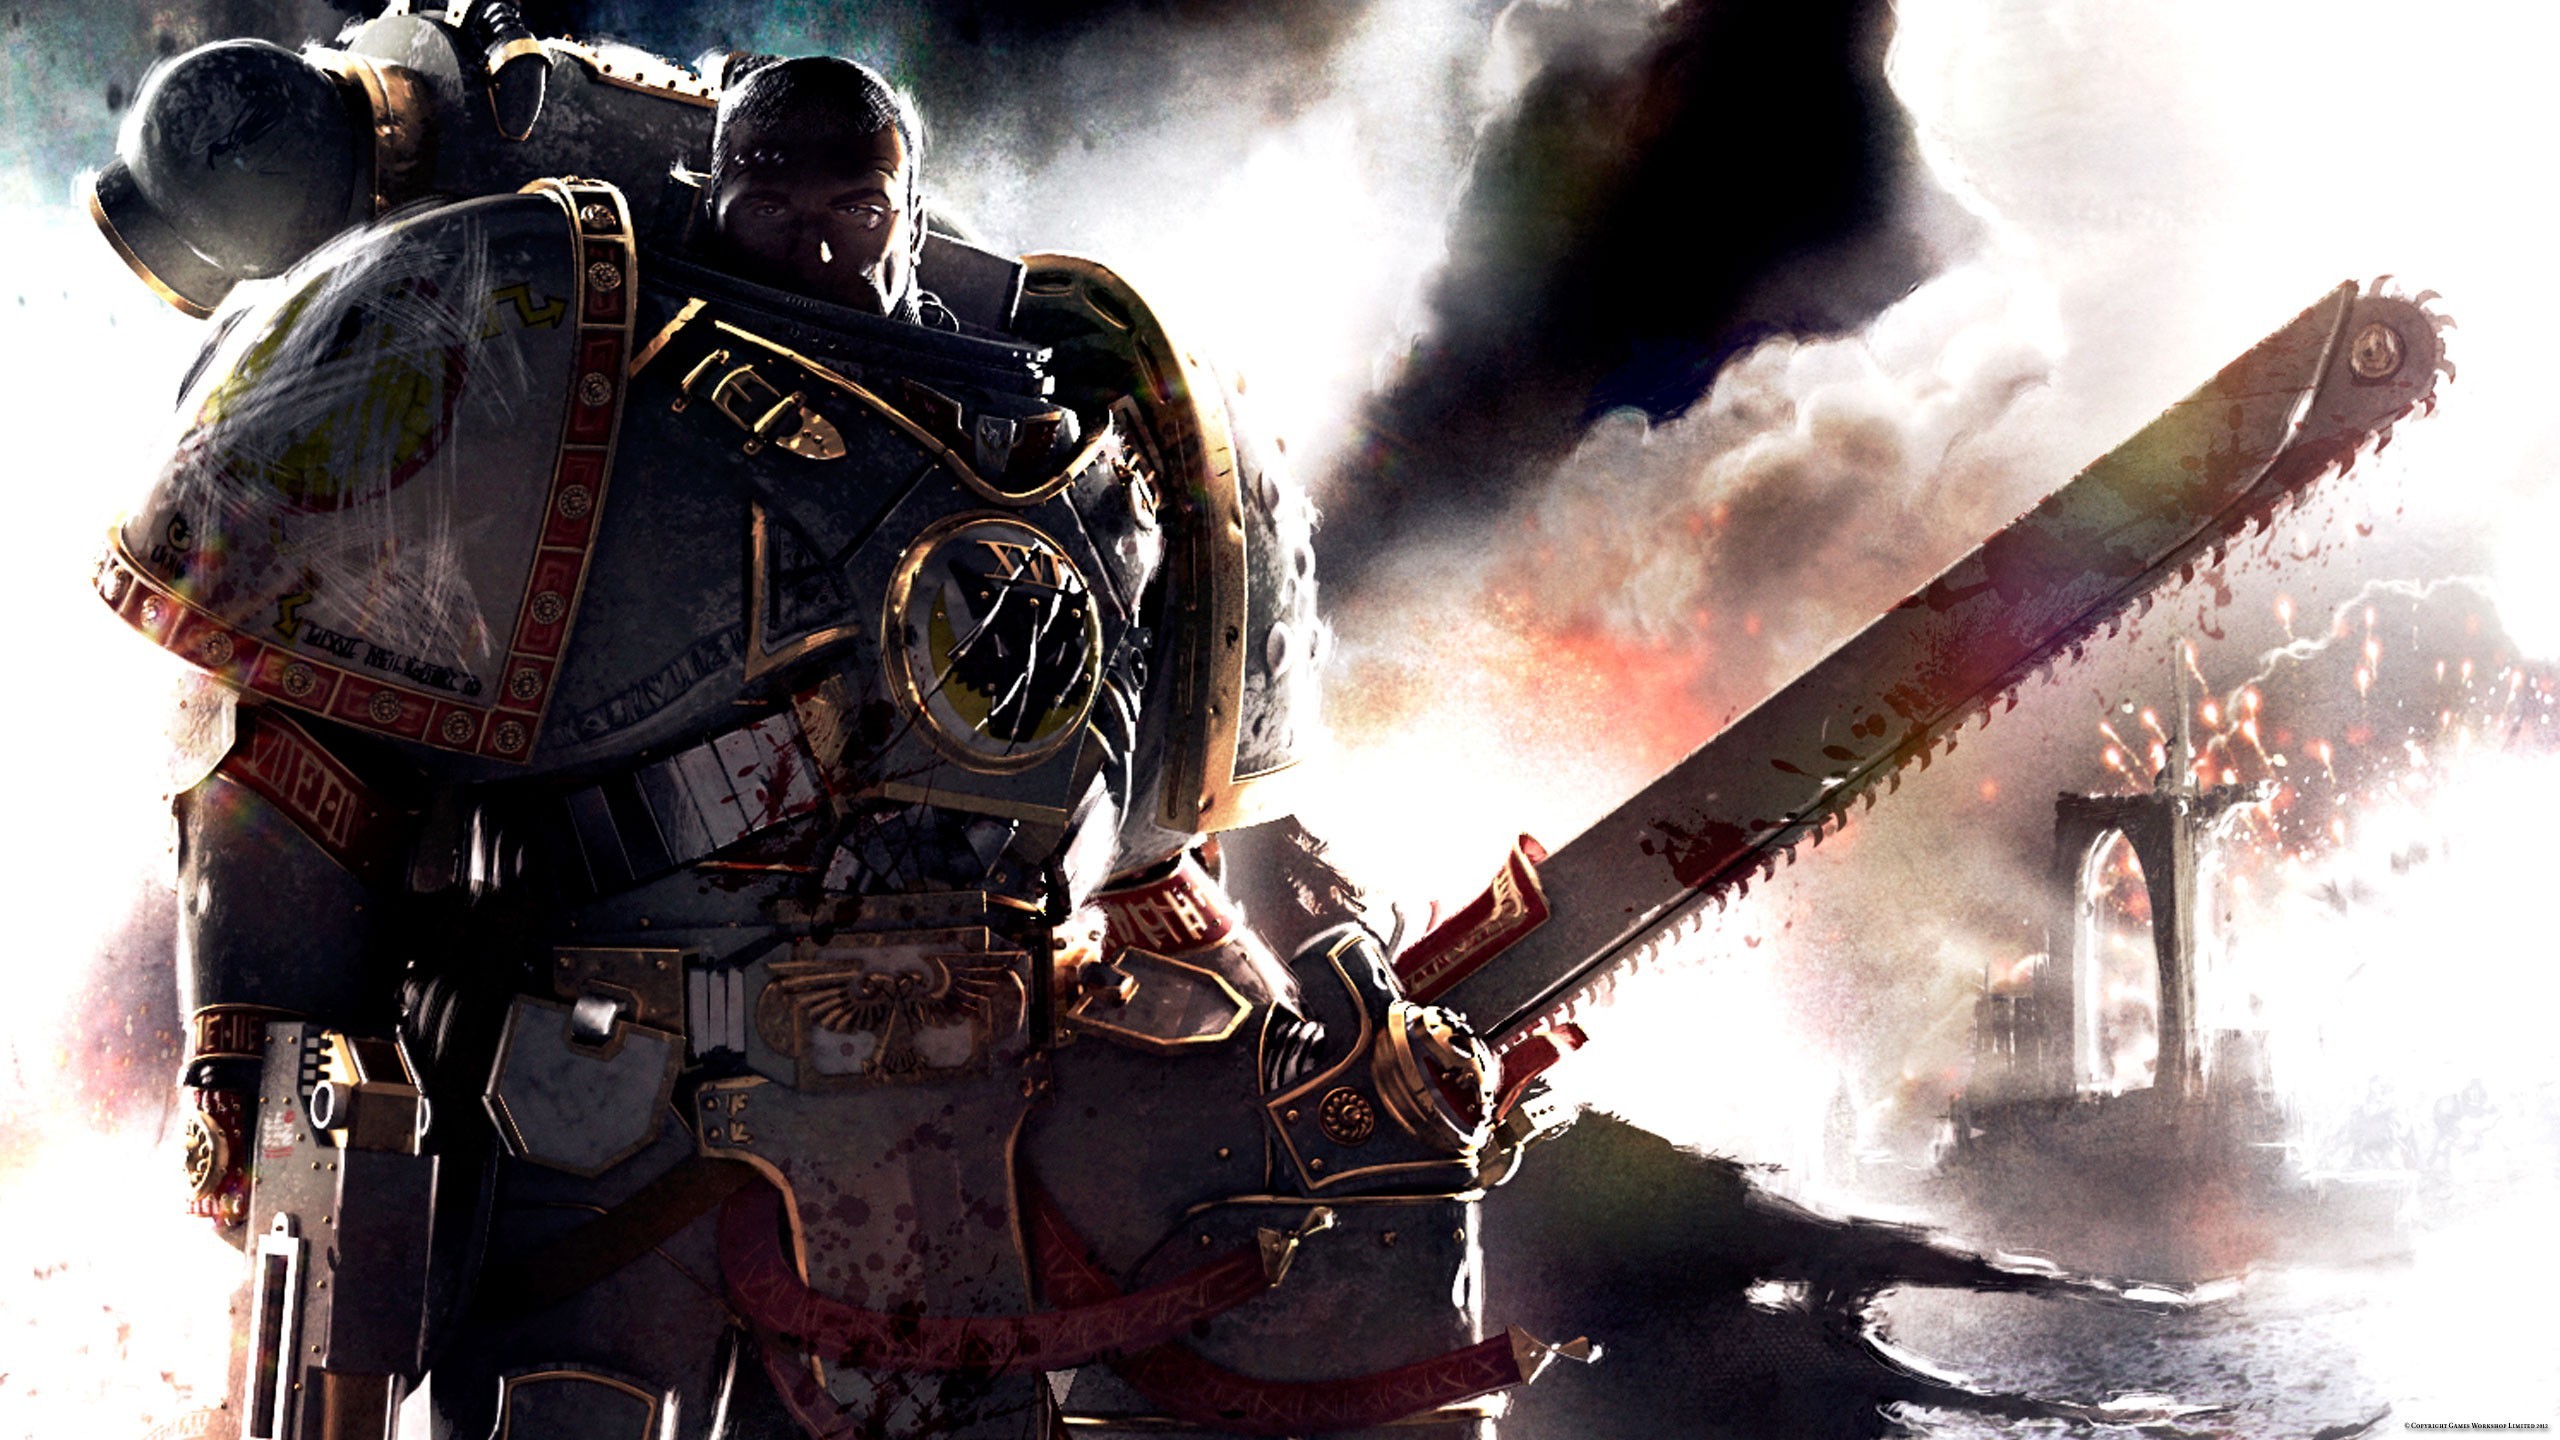 Wallpaper Space Wolves chaos space marines demons Warhammer 40 000  Khorne Berserker images for desktop section фантастика  download